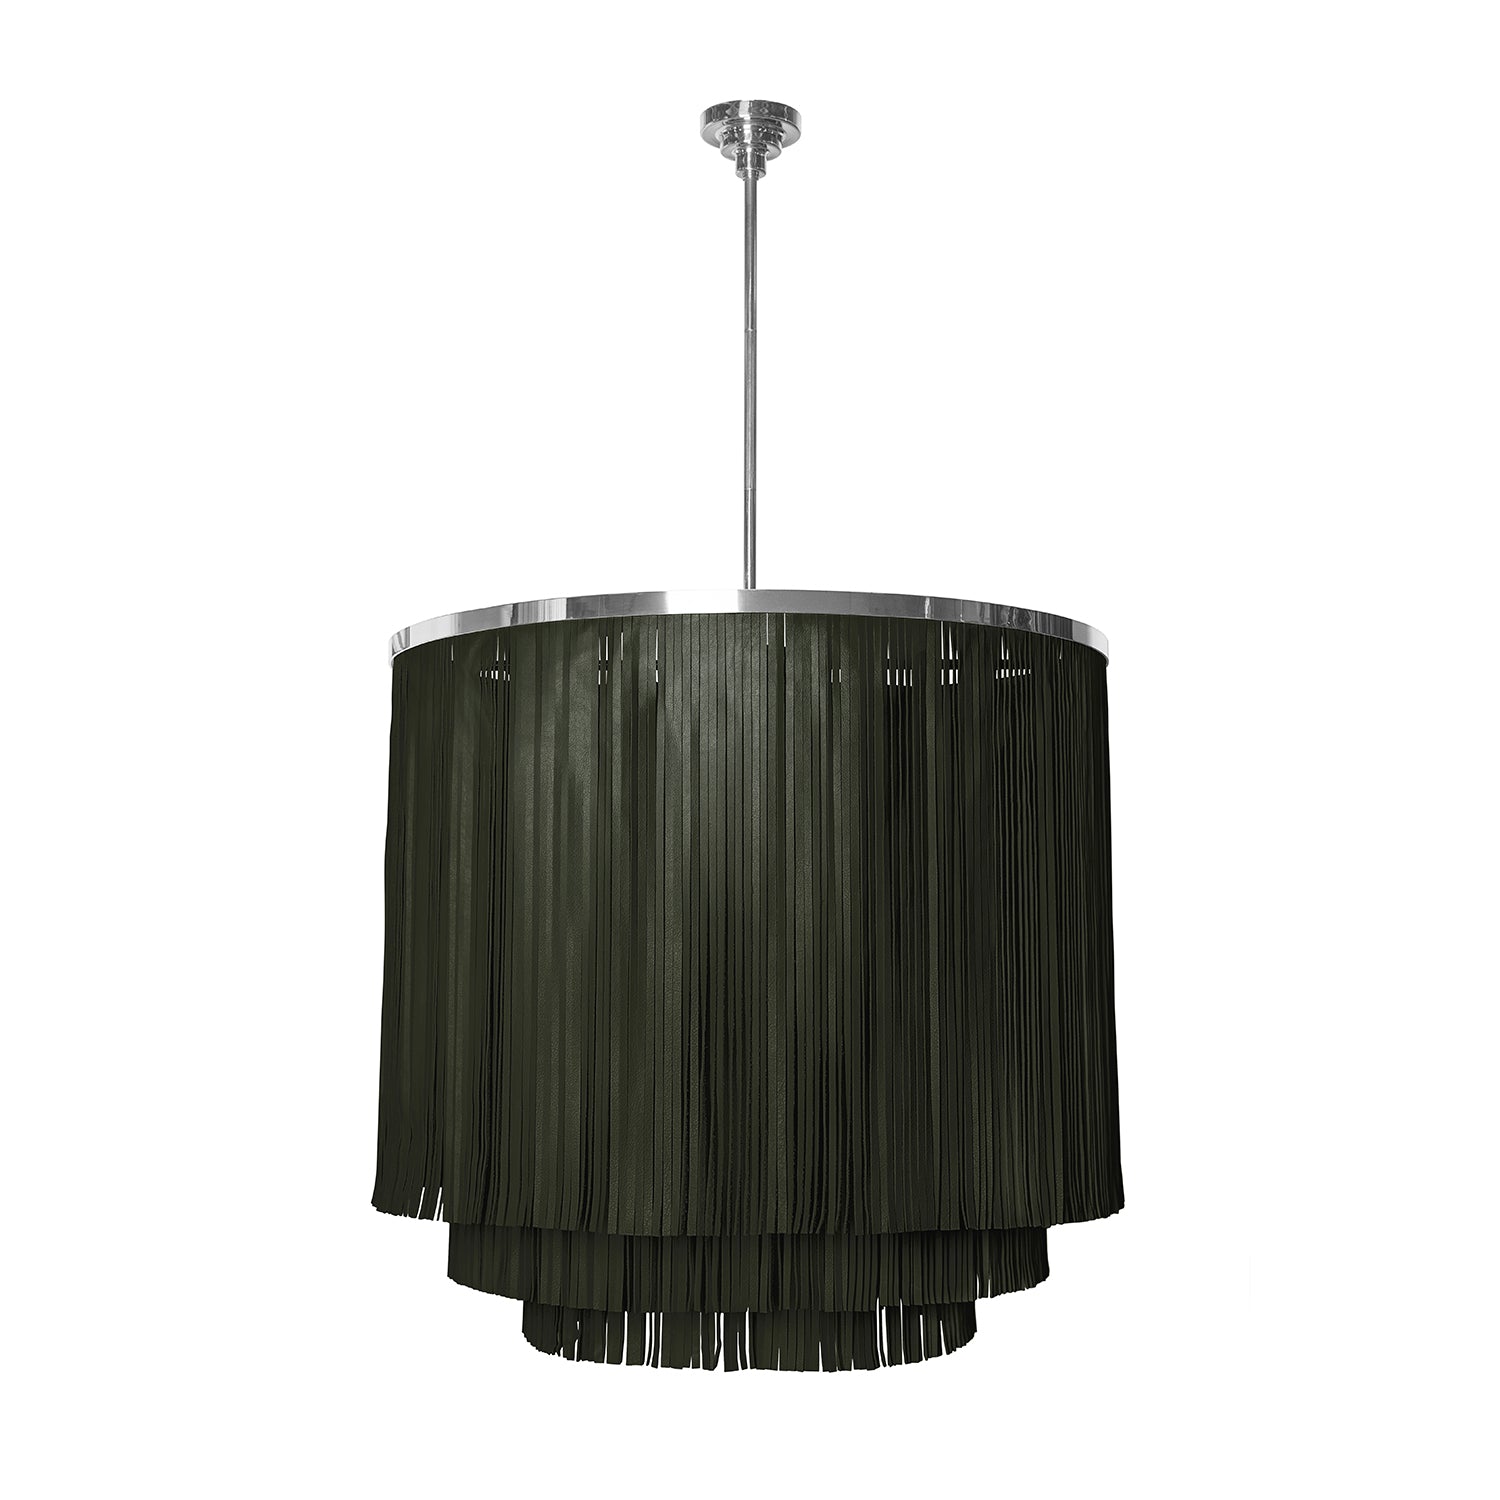 Large NeKeia Leather Chandelier in Nickel Finish and NeKeia Leather